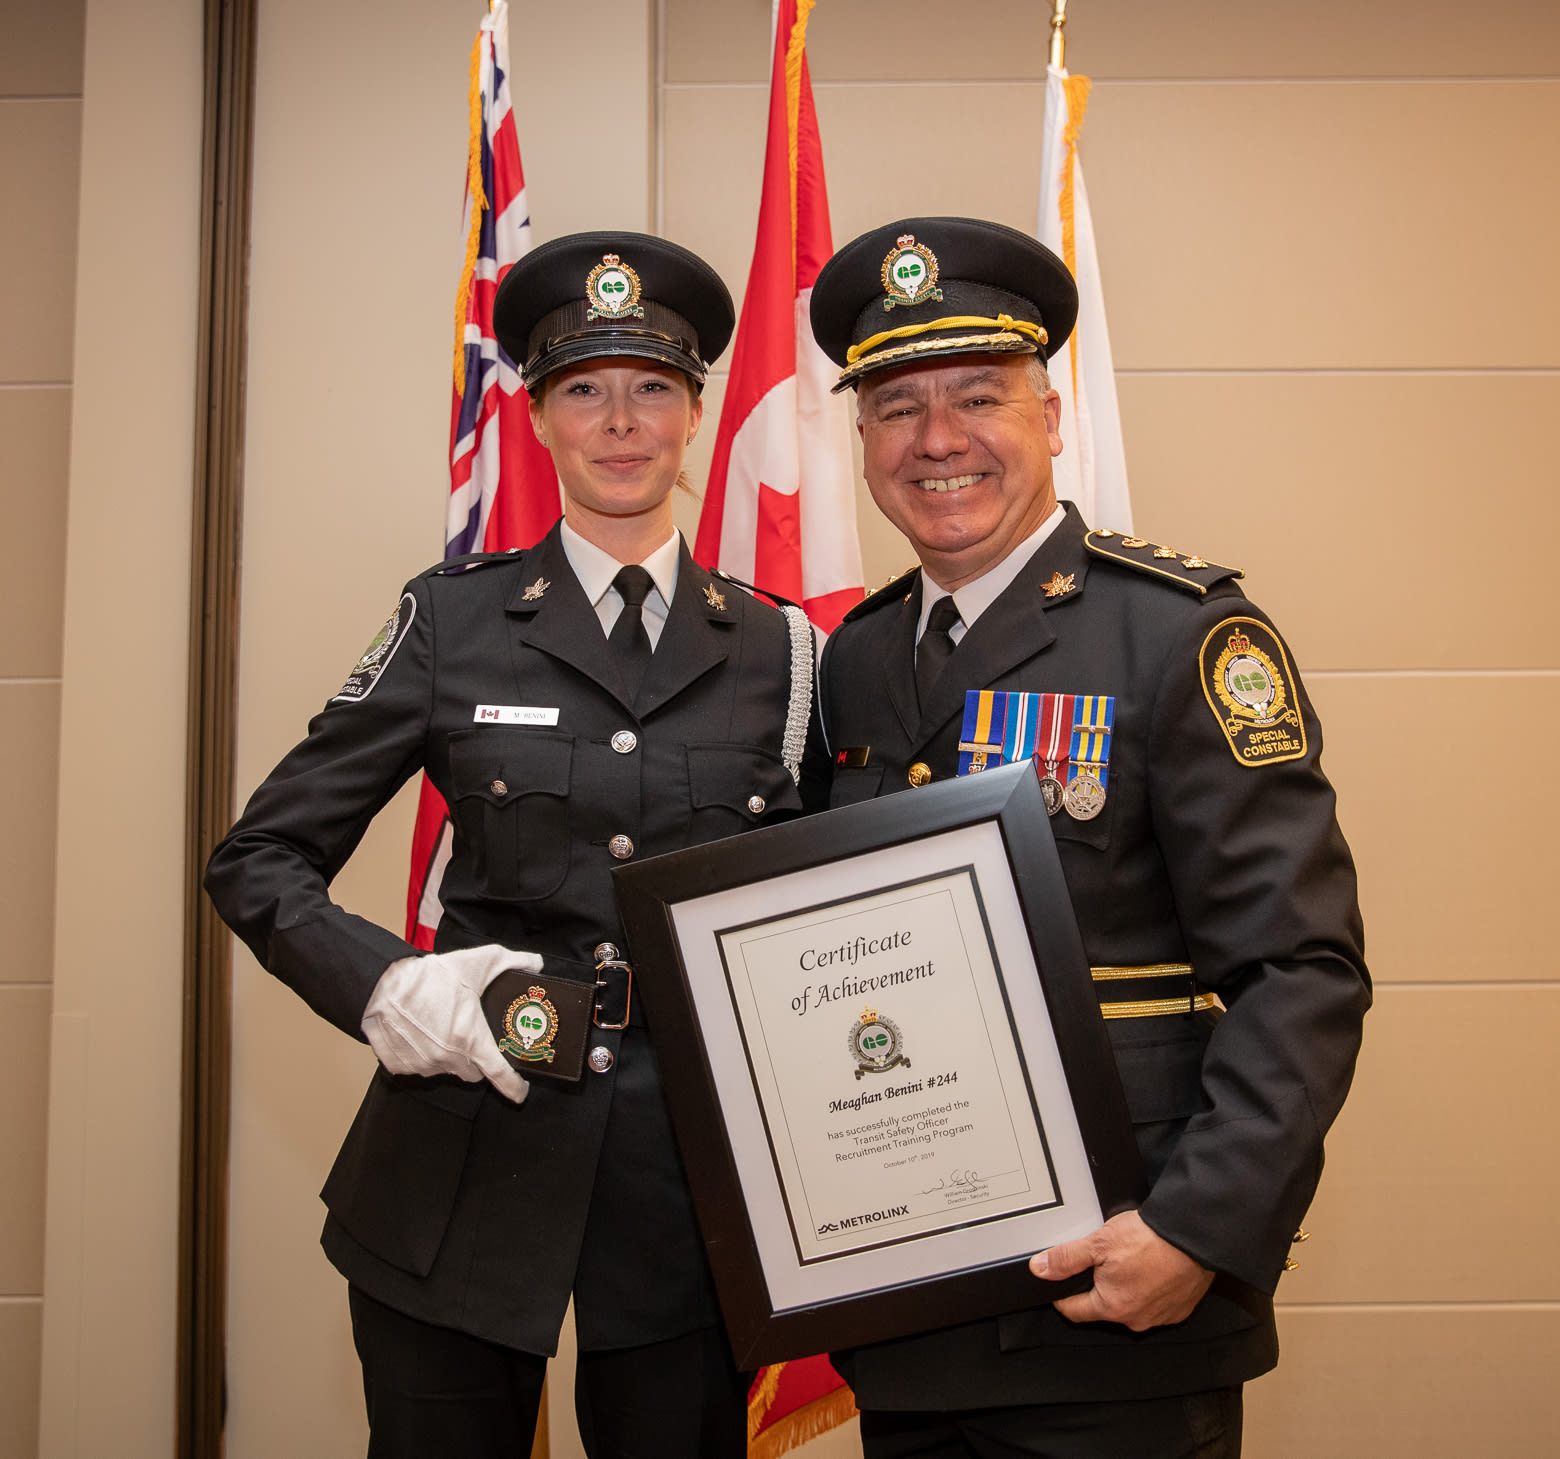 Meaghan Benini pictured with Transit Safety Director Bill Grodzinski at her graduation ceremony